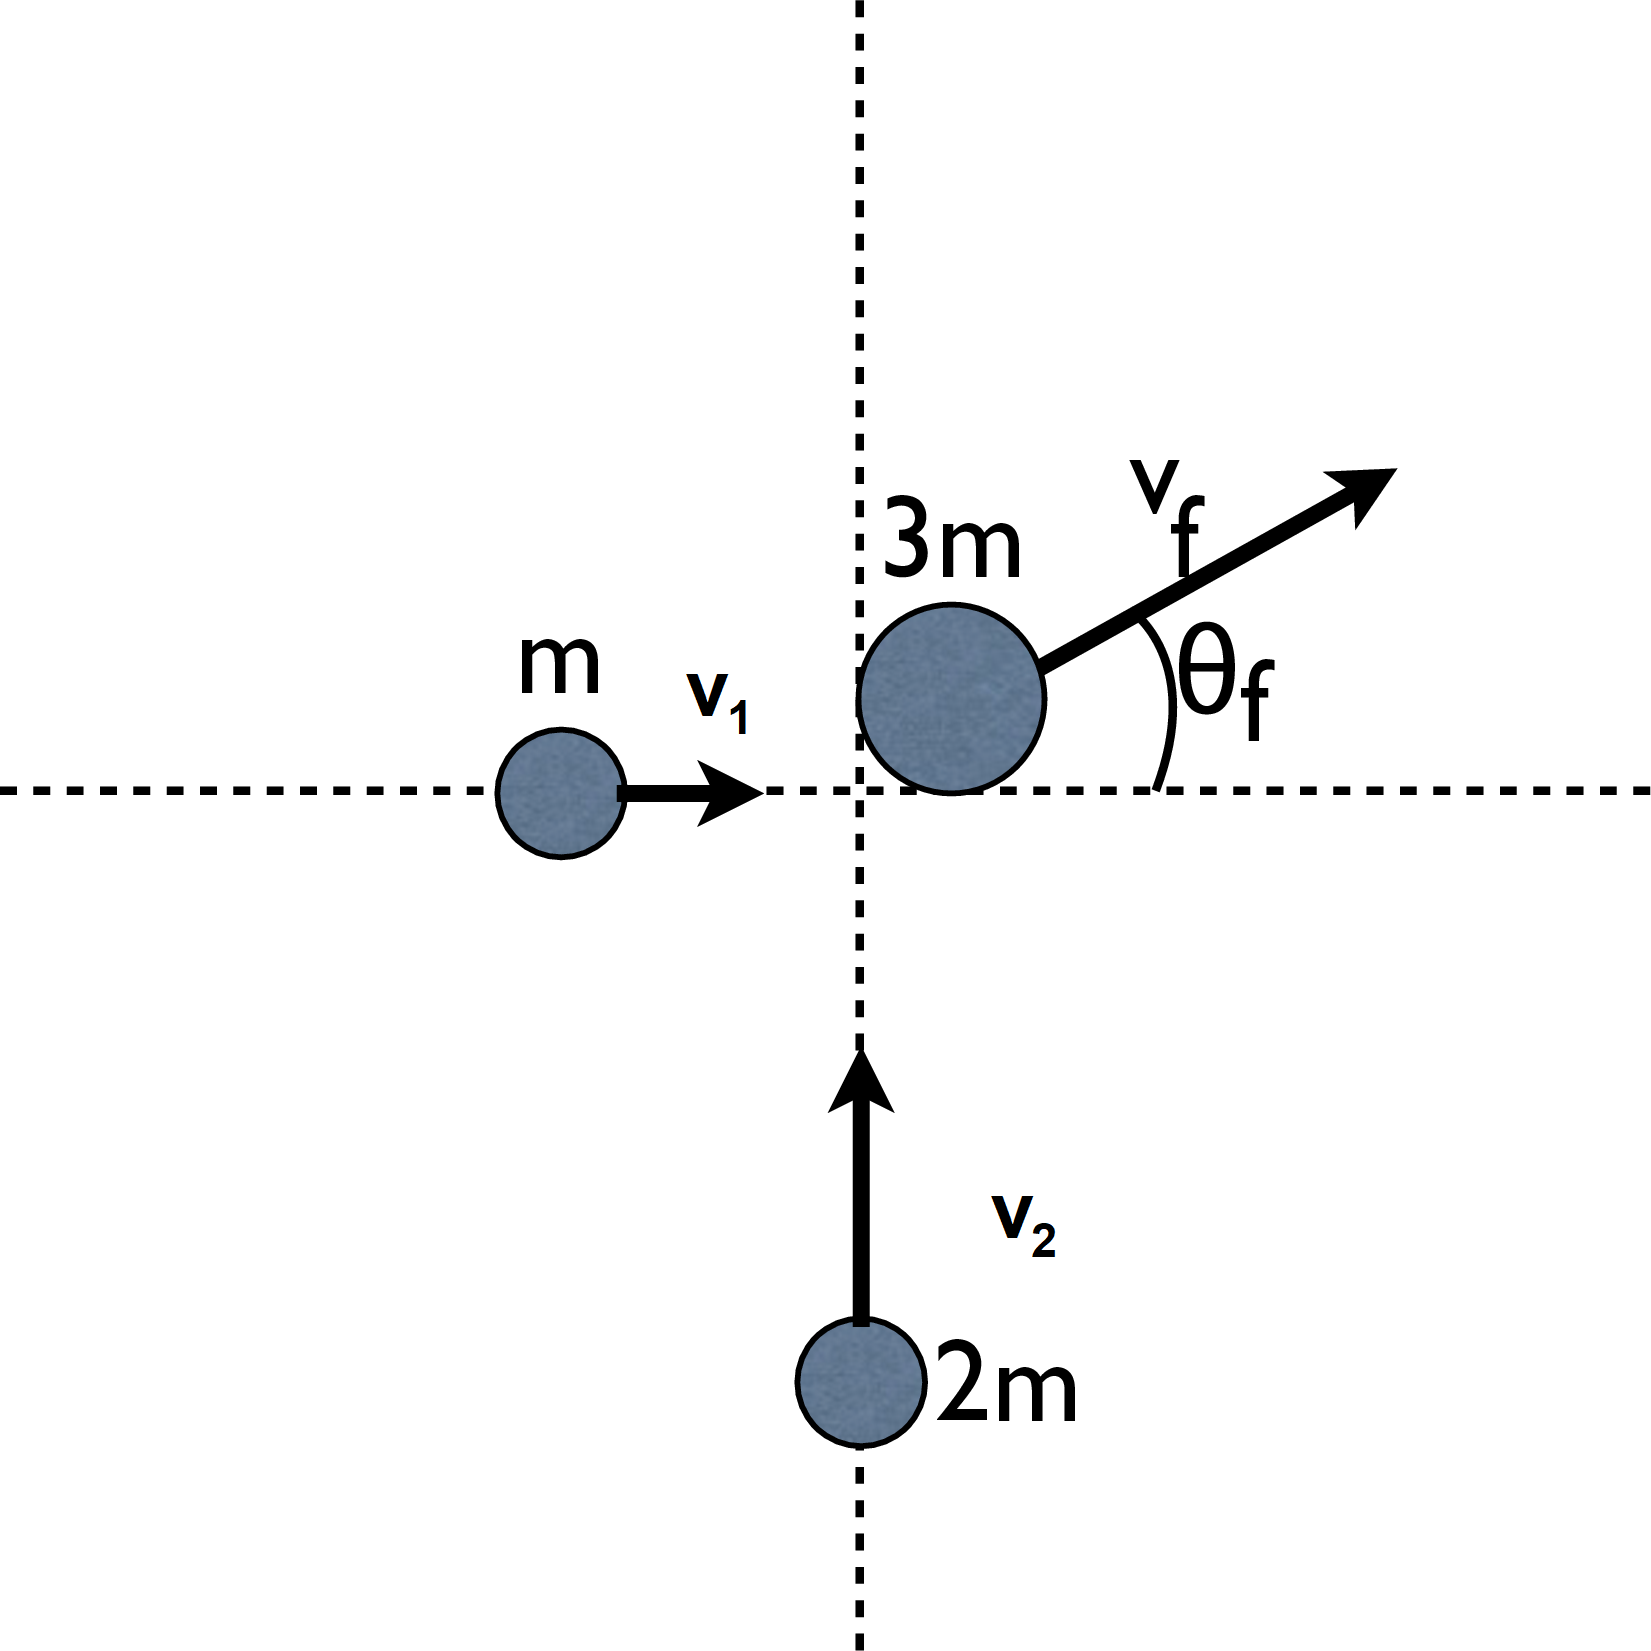 Figure of a particle of mass m travelling to the right with velocity v1 along the x-axis and a particle of mass 2m travelling up with velocity v2 along the right axis. The two particles collide and form a resulting particle of mass 3m which moves with velocity v f at an angle theta f with respect to the x-axis.